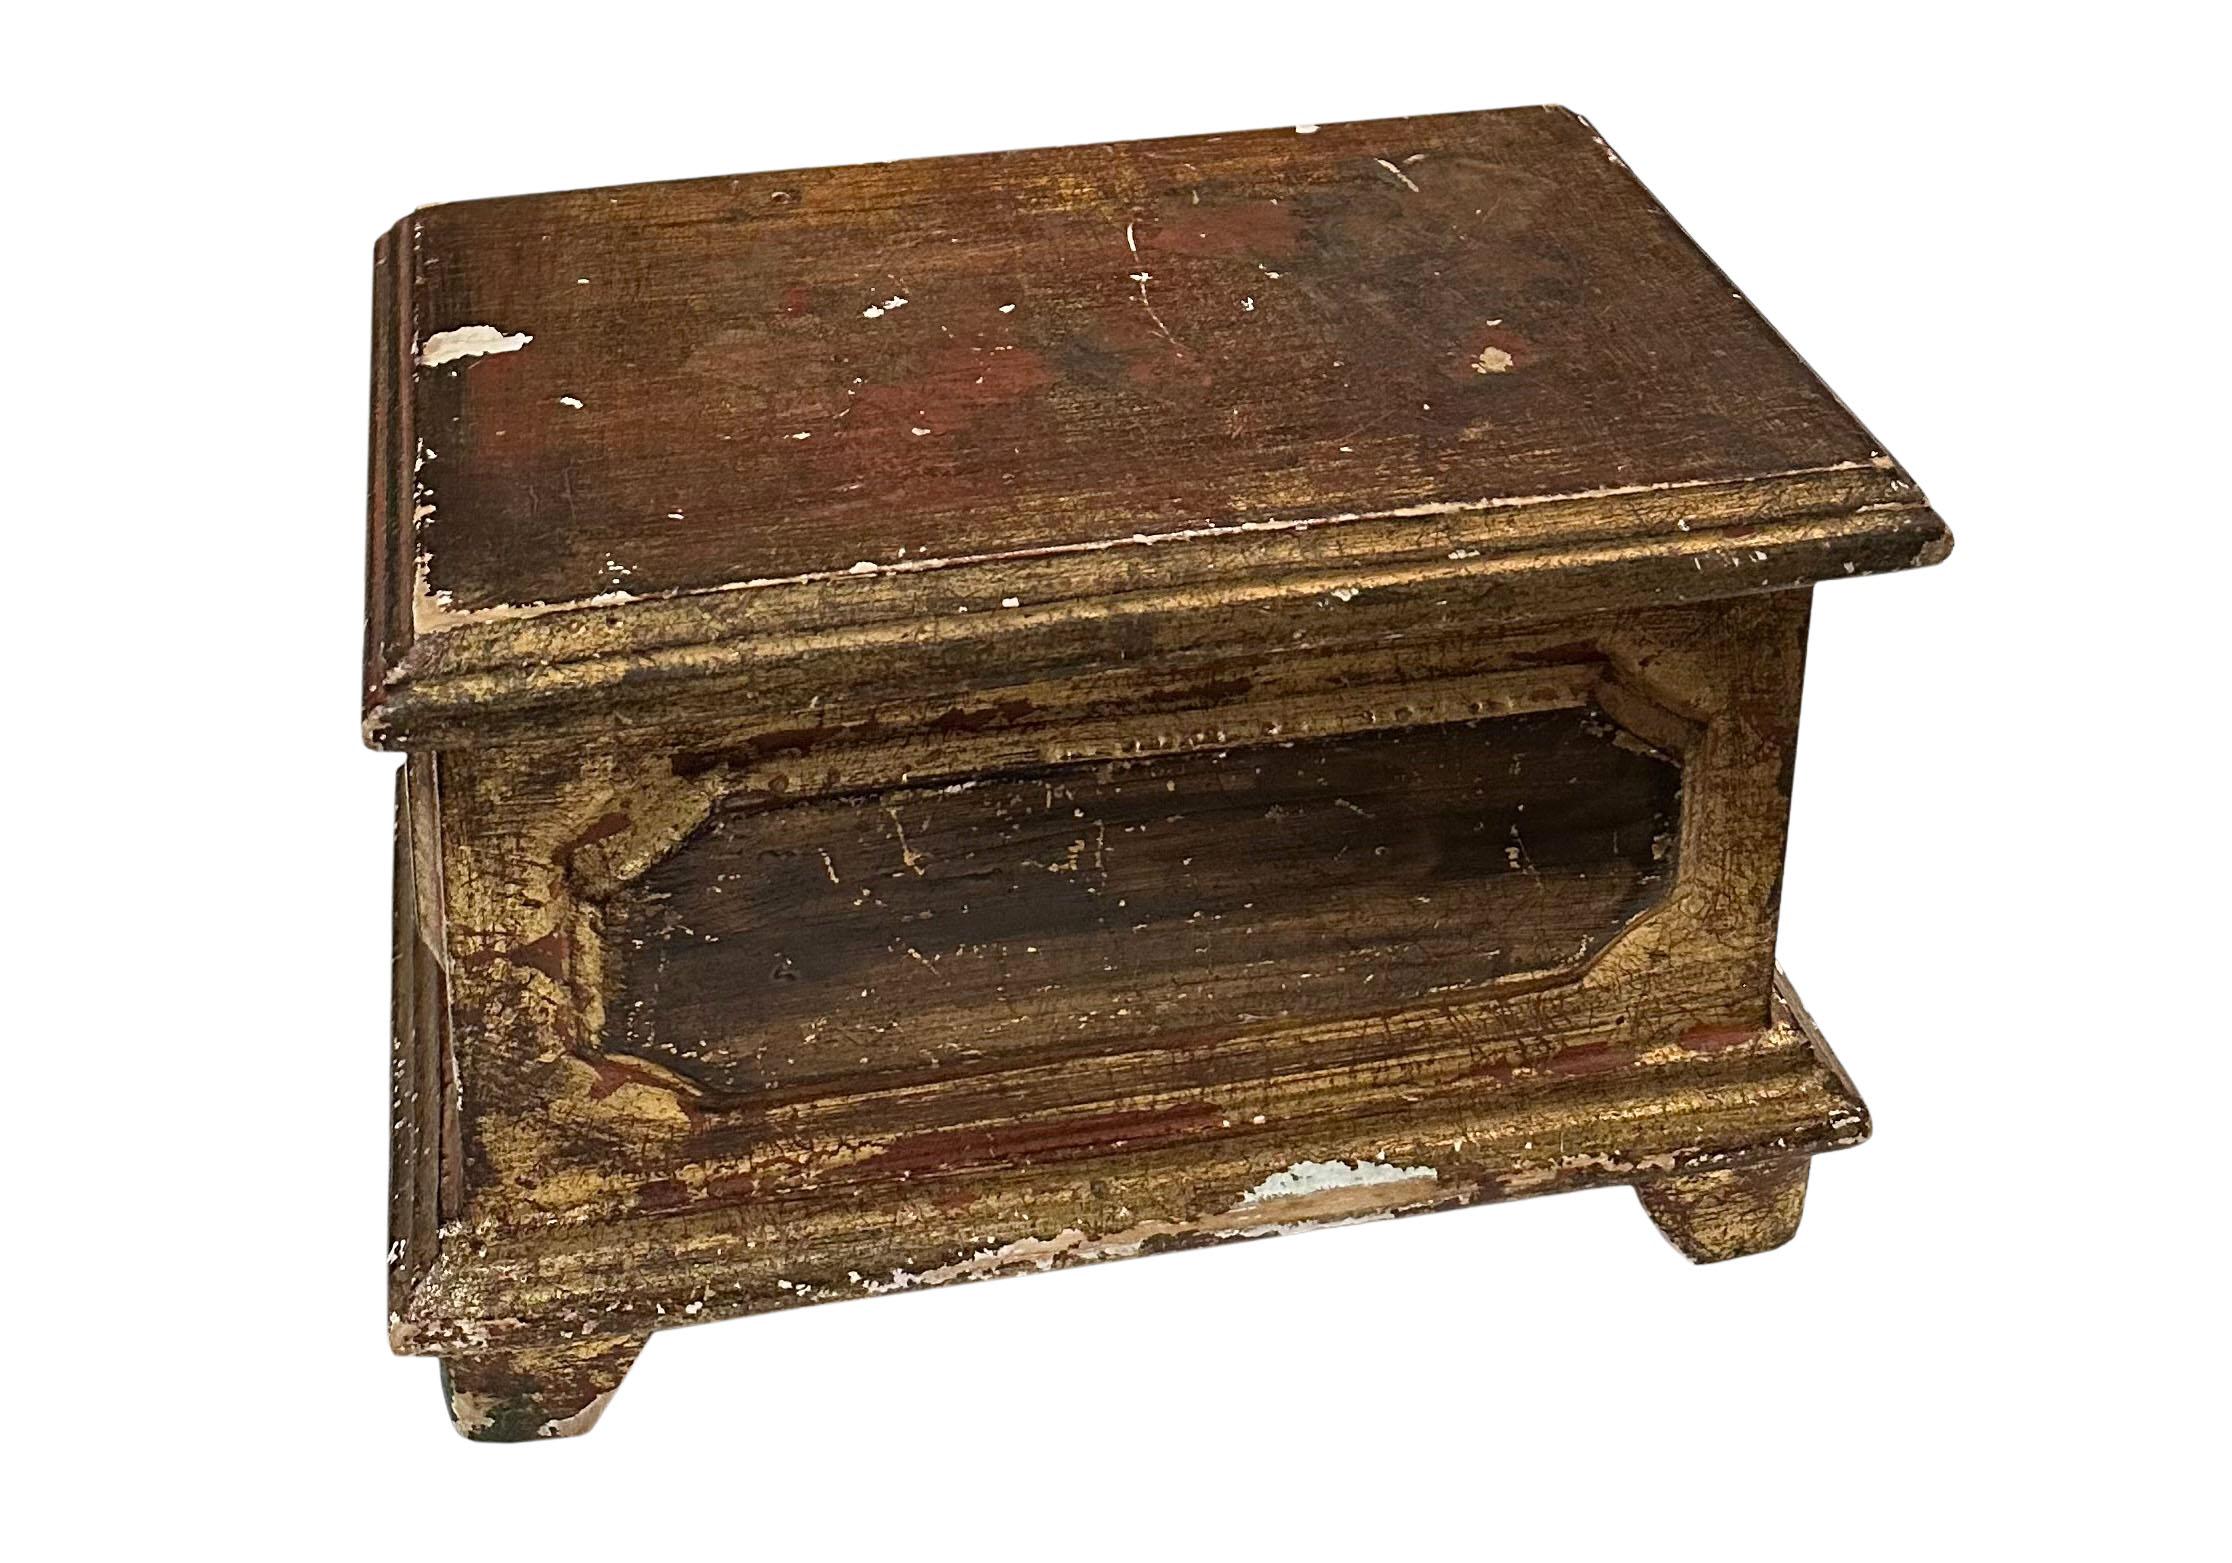 A turn-of-the-century gold gilt wood Florentine box from Italy. The interior is a pinky red or an Italian red has a great surface which is pretty typical of this kind of box and age.